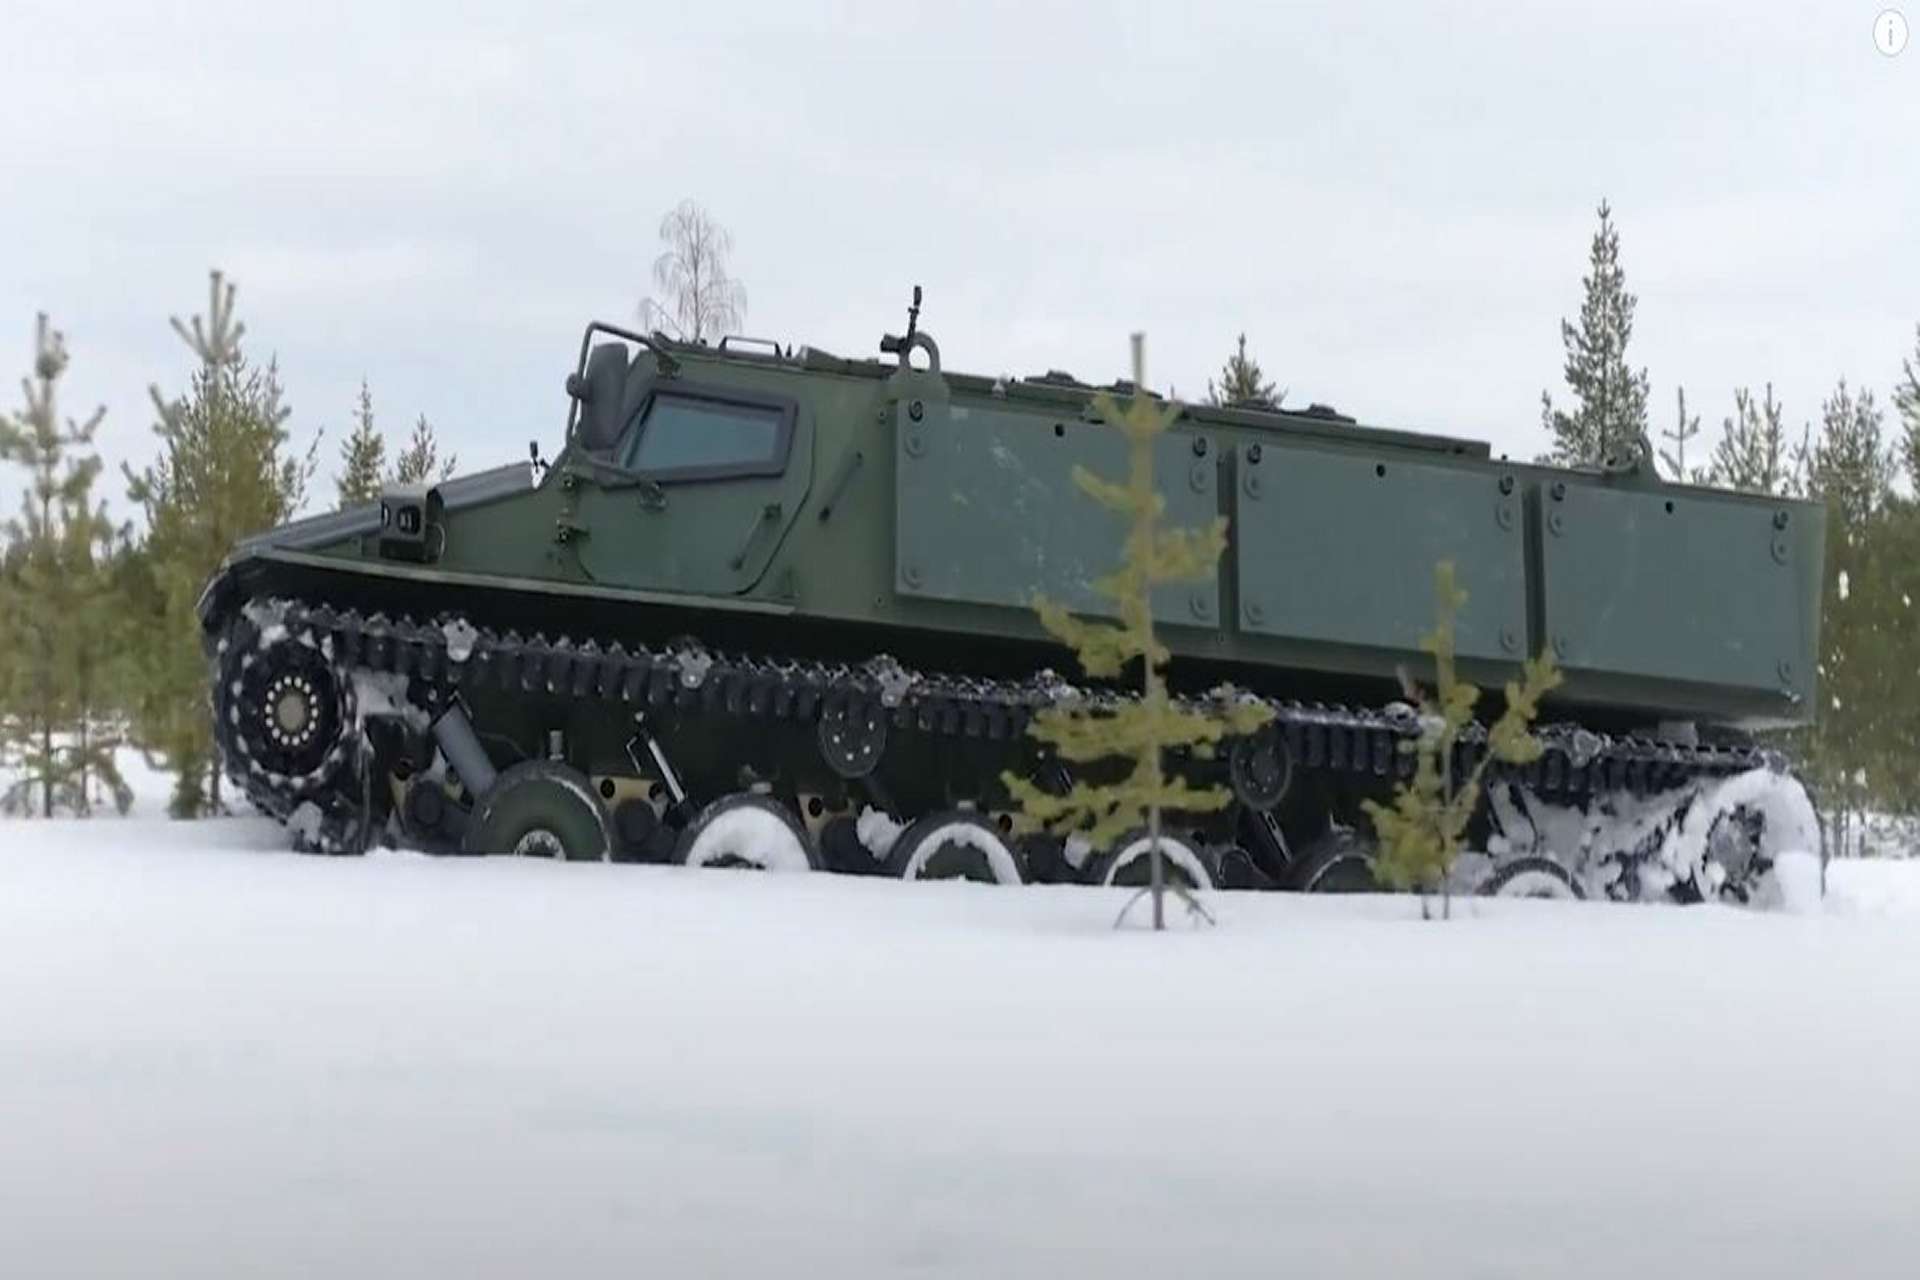 Patria demonstrates maneuvers of its new FAMOUS all-terrain tracked vehicle in snowy Finnish forests